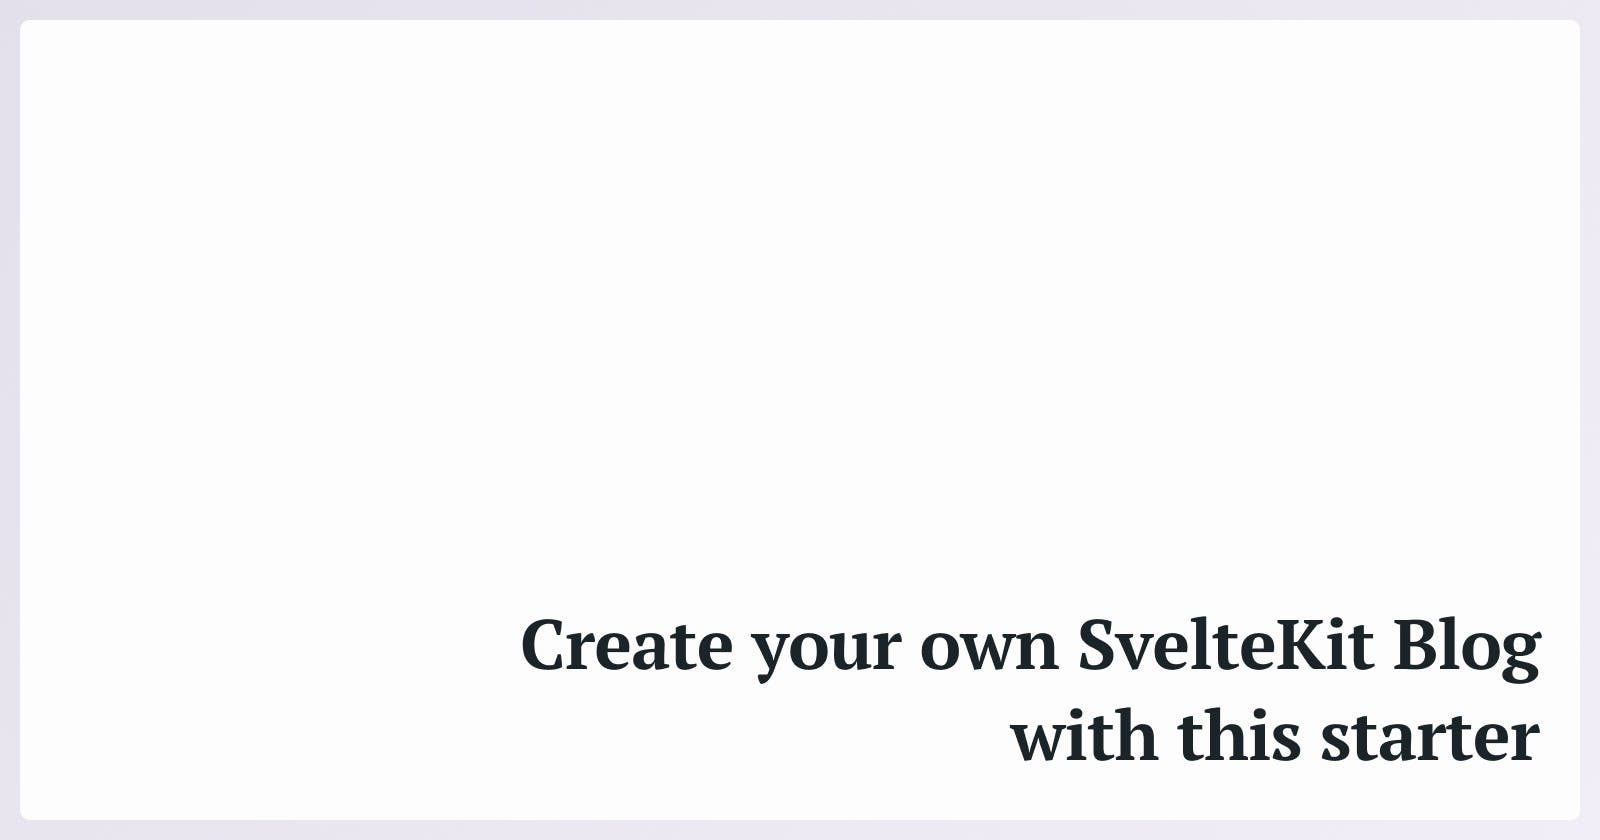 Create your own SvelteKit Blog with this starter